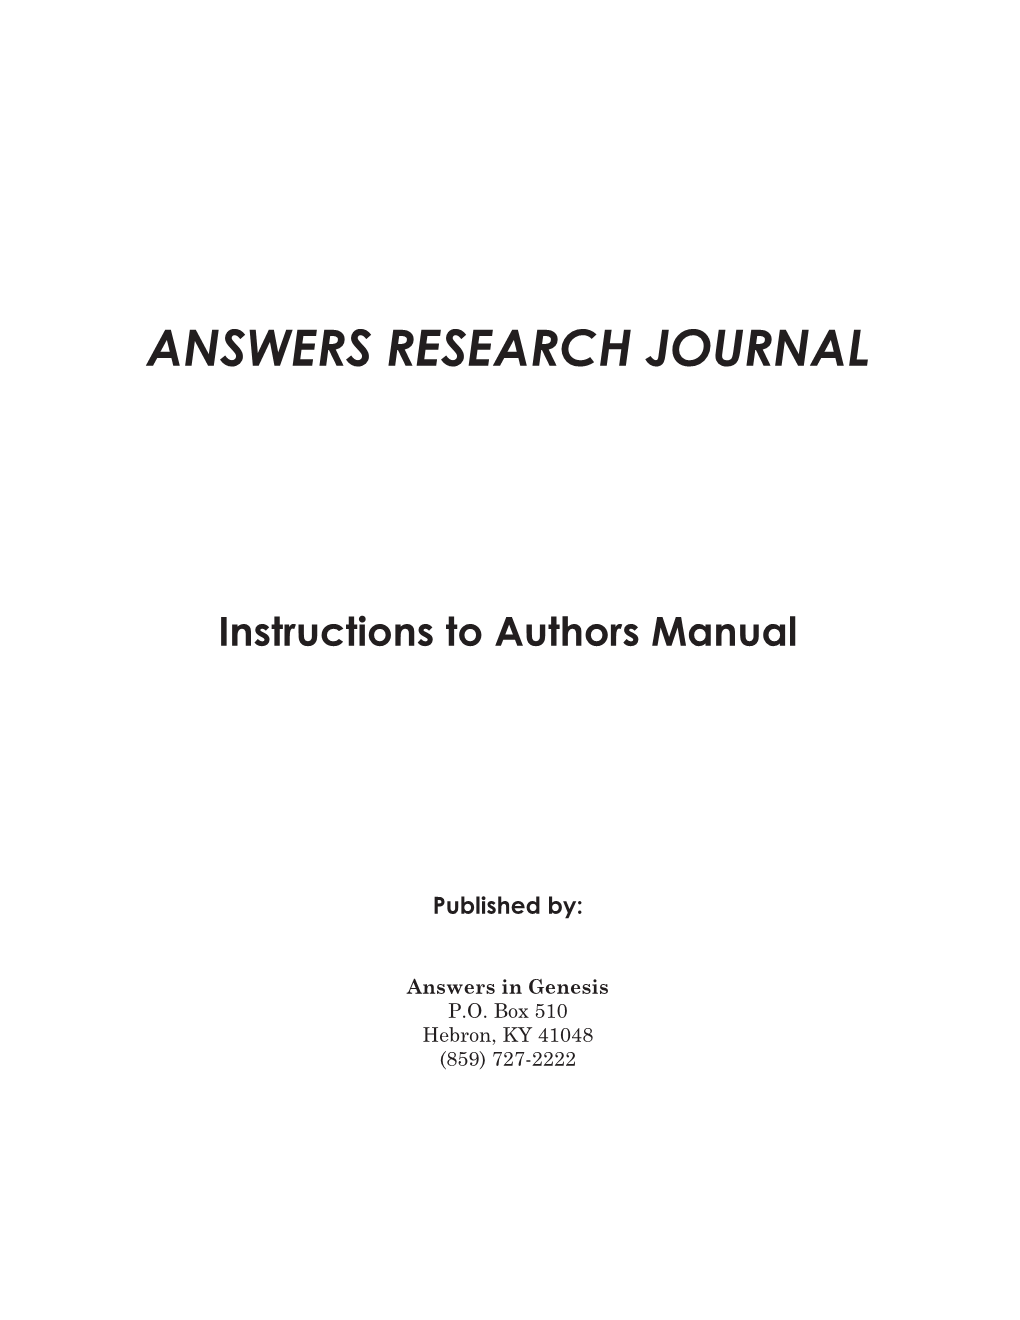 Answers Research Journal